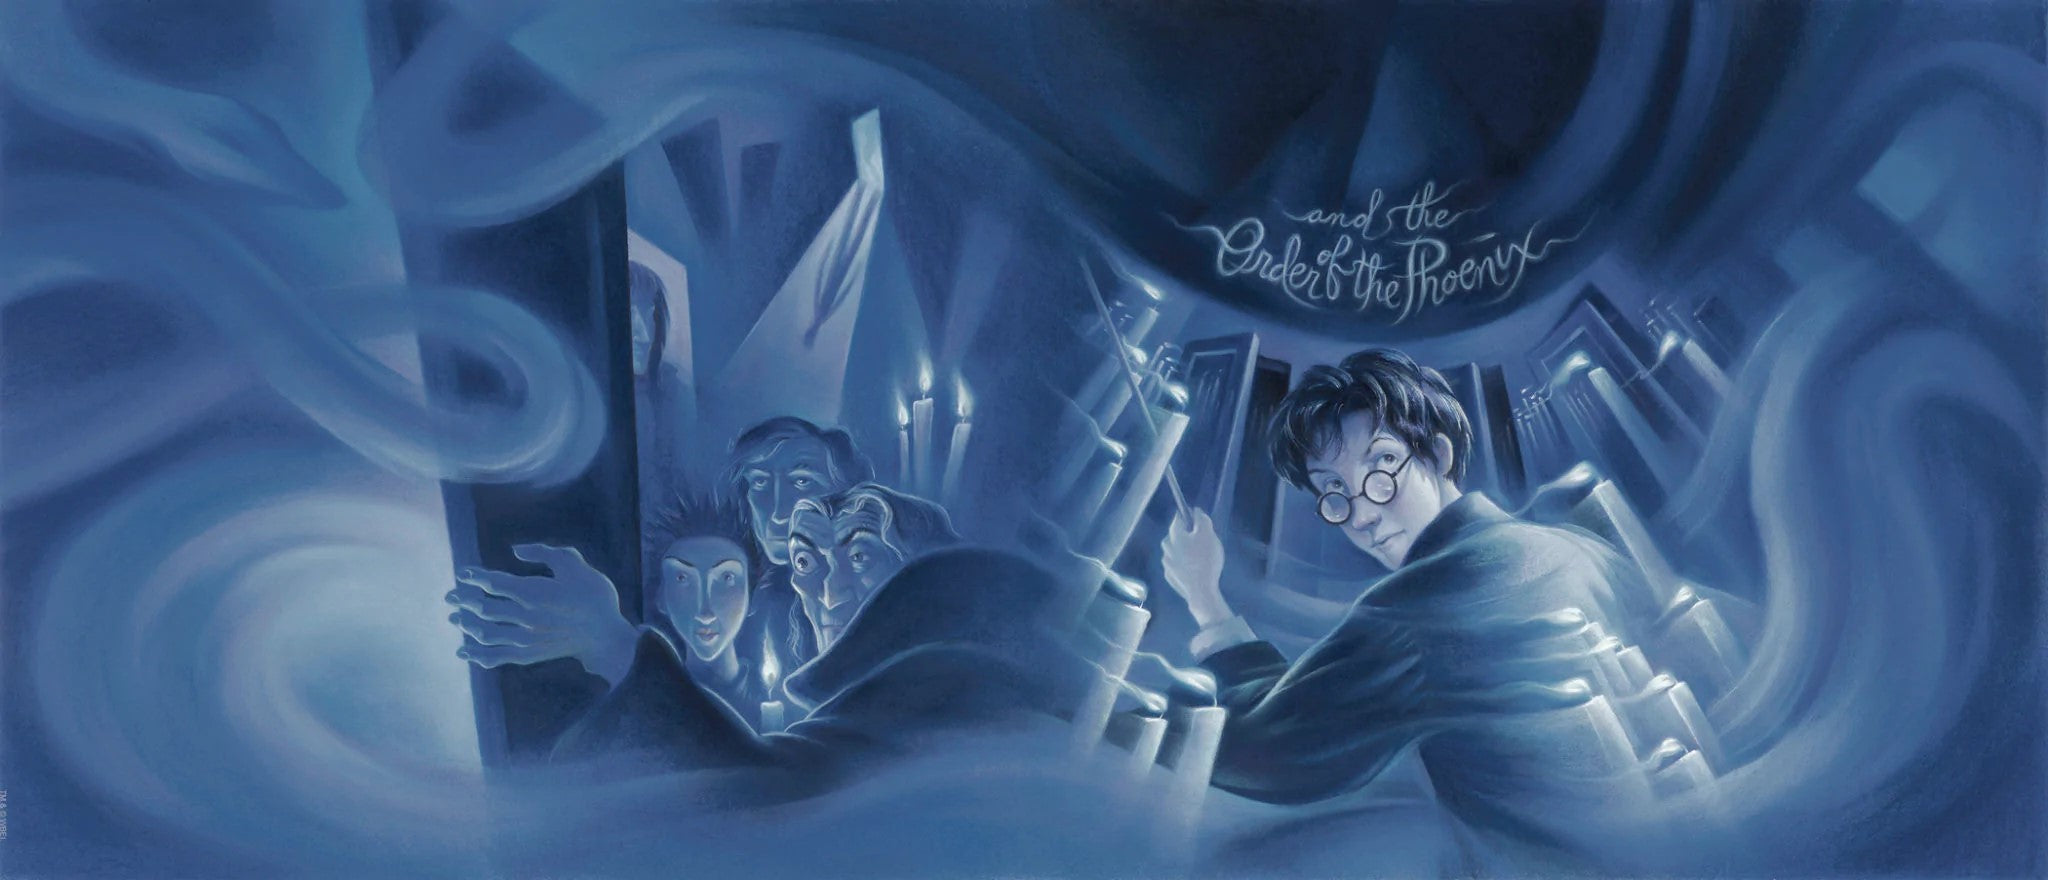 Book 5 Harry Potter and the Order of The Phoenix- By Mary GrandPré - Giclée on Paper